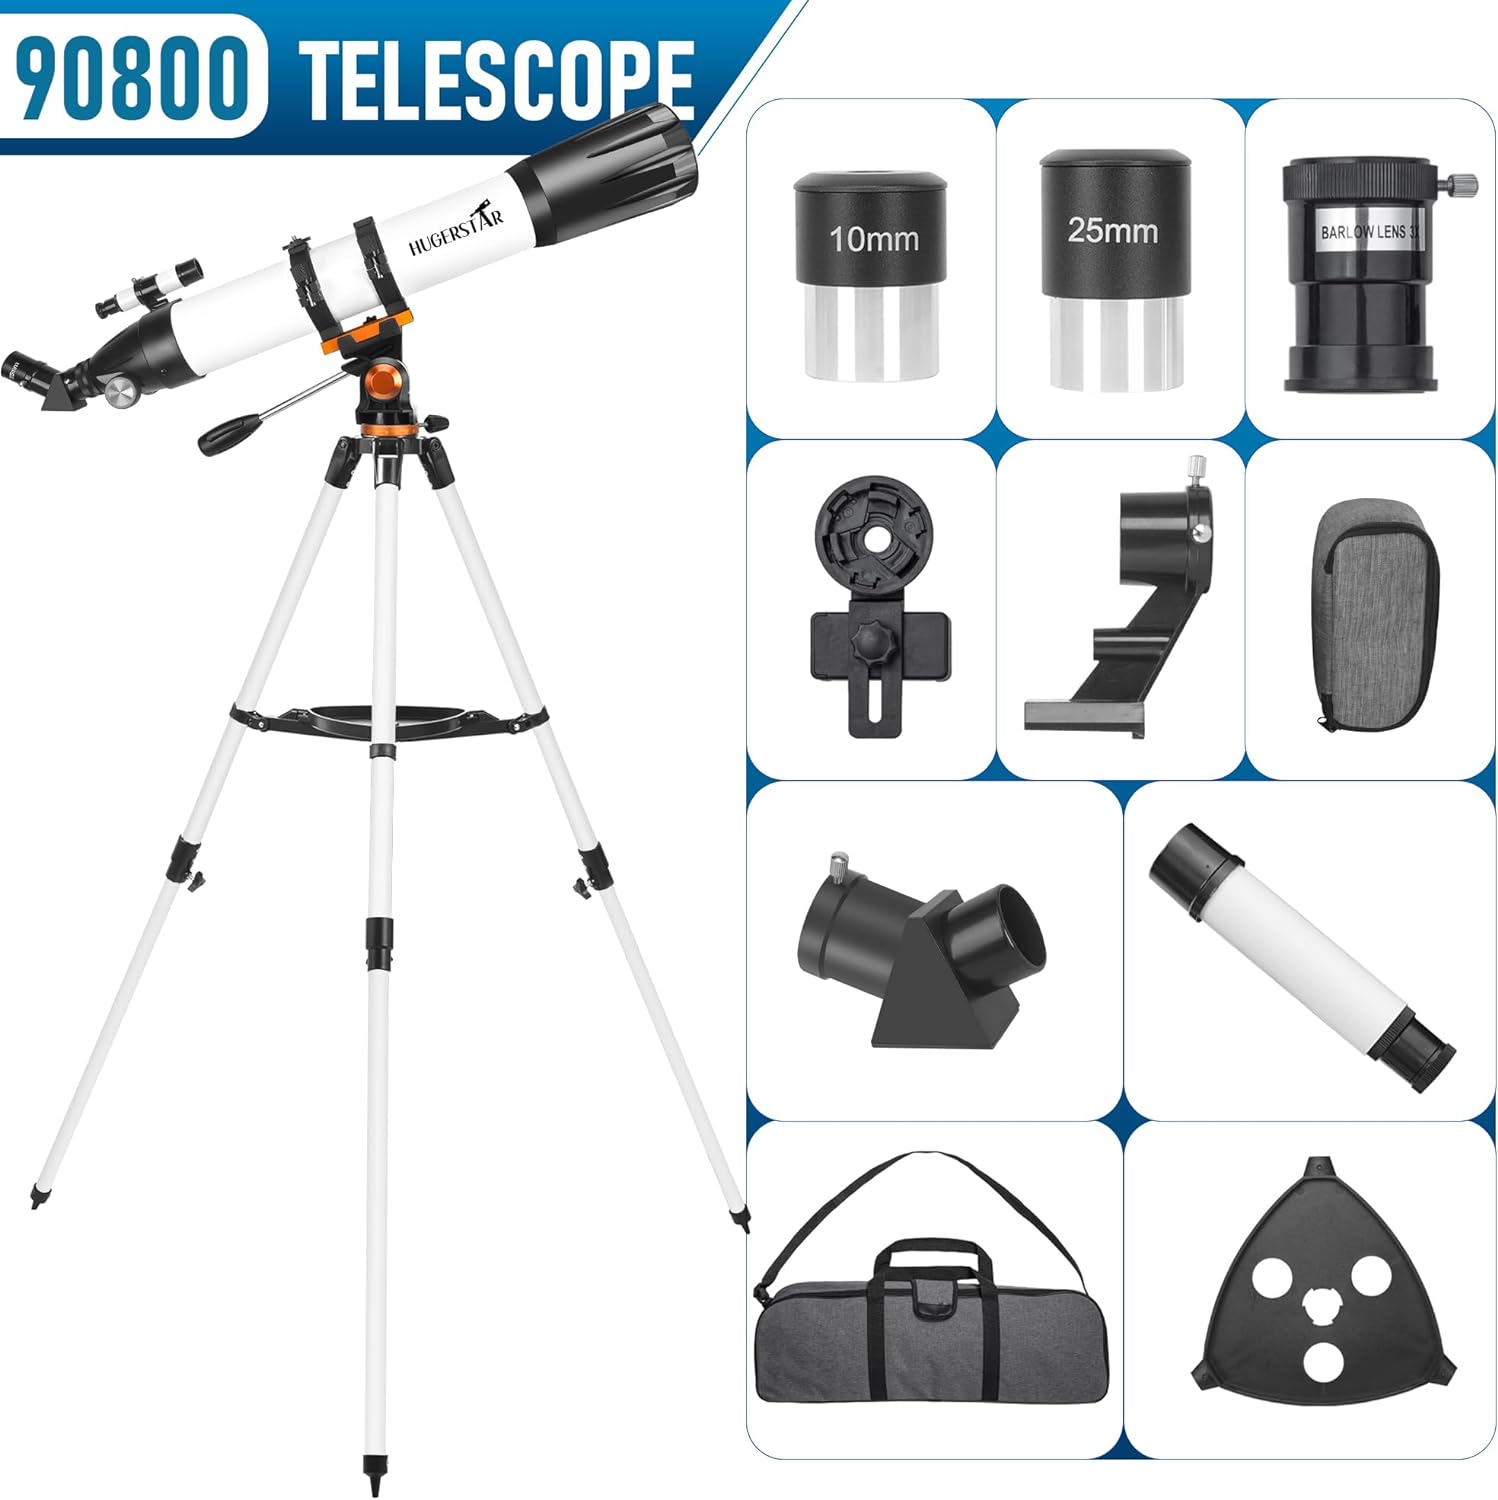 HUGERSTAR Telescope, 90mm Telescopes for Adults Astronomy Kids Beginners, 800mm Refracting Telescope Fully Multi-Coated High Transmission Coatings with Phone Mount, Observe The Moon and Stars